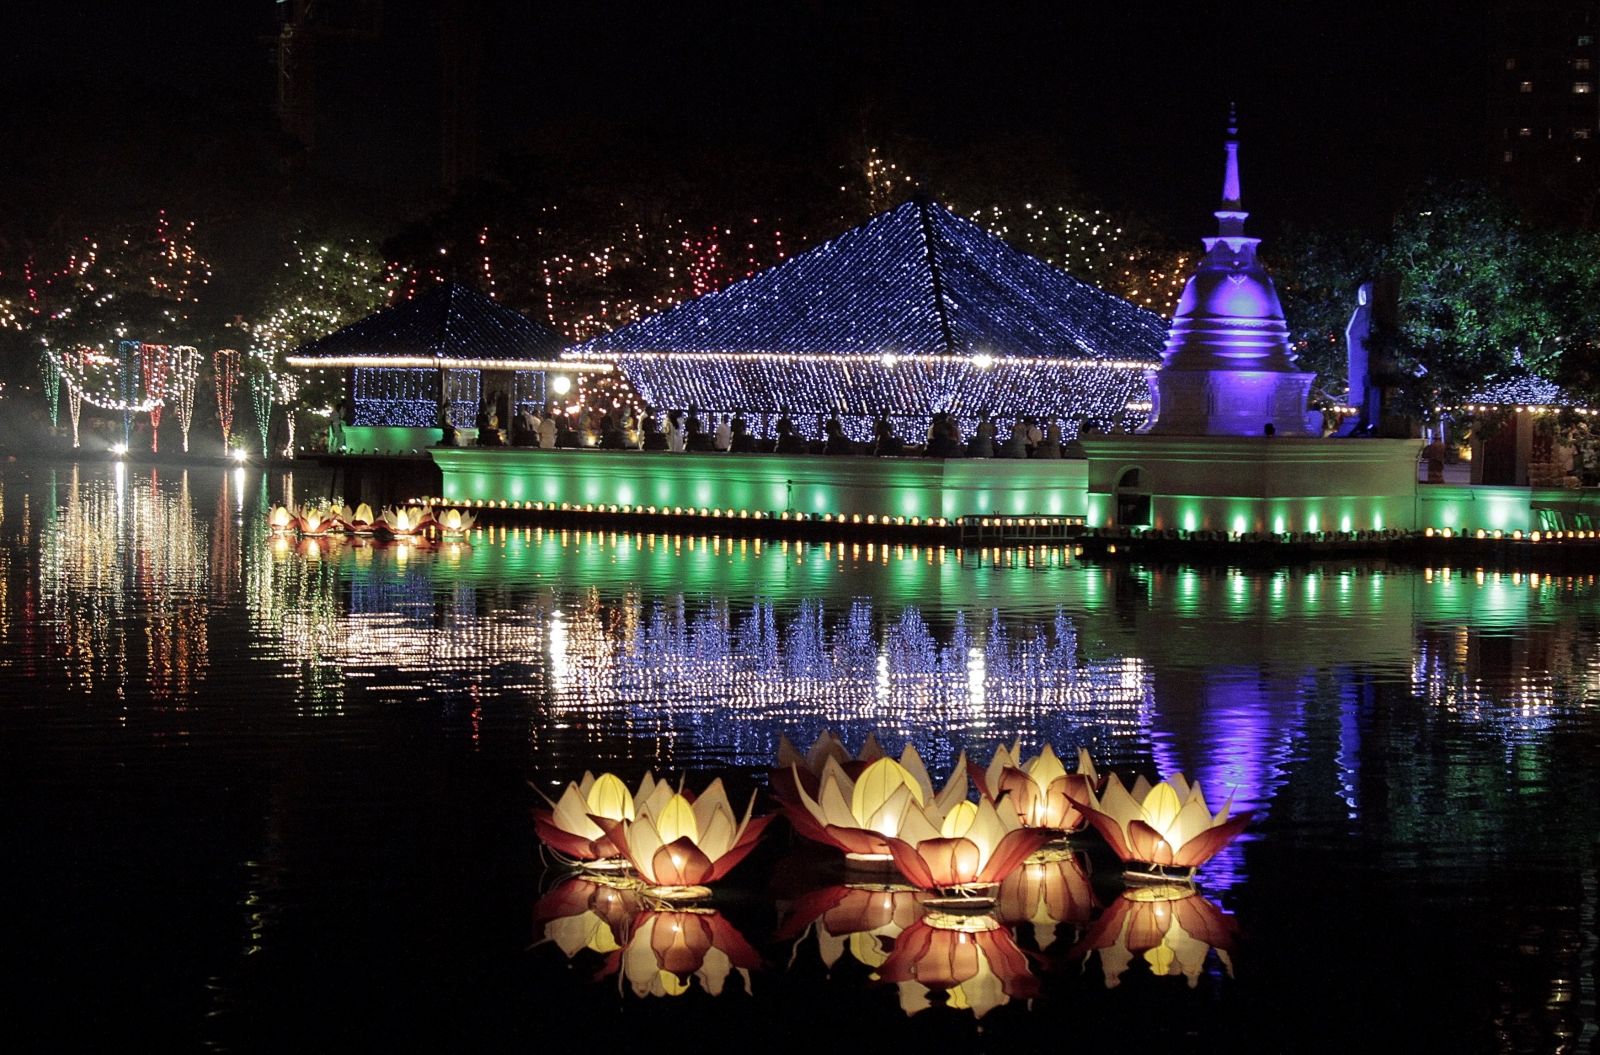 Vesak Day: How the birth, enlightenment and death of the Buddha is celebrated